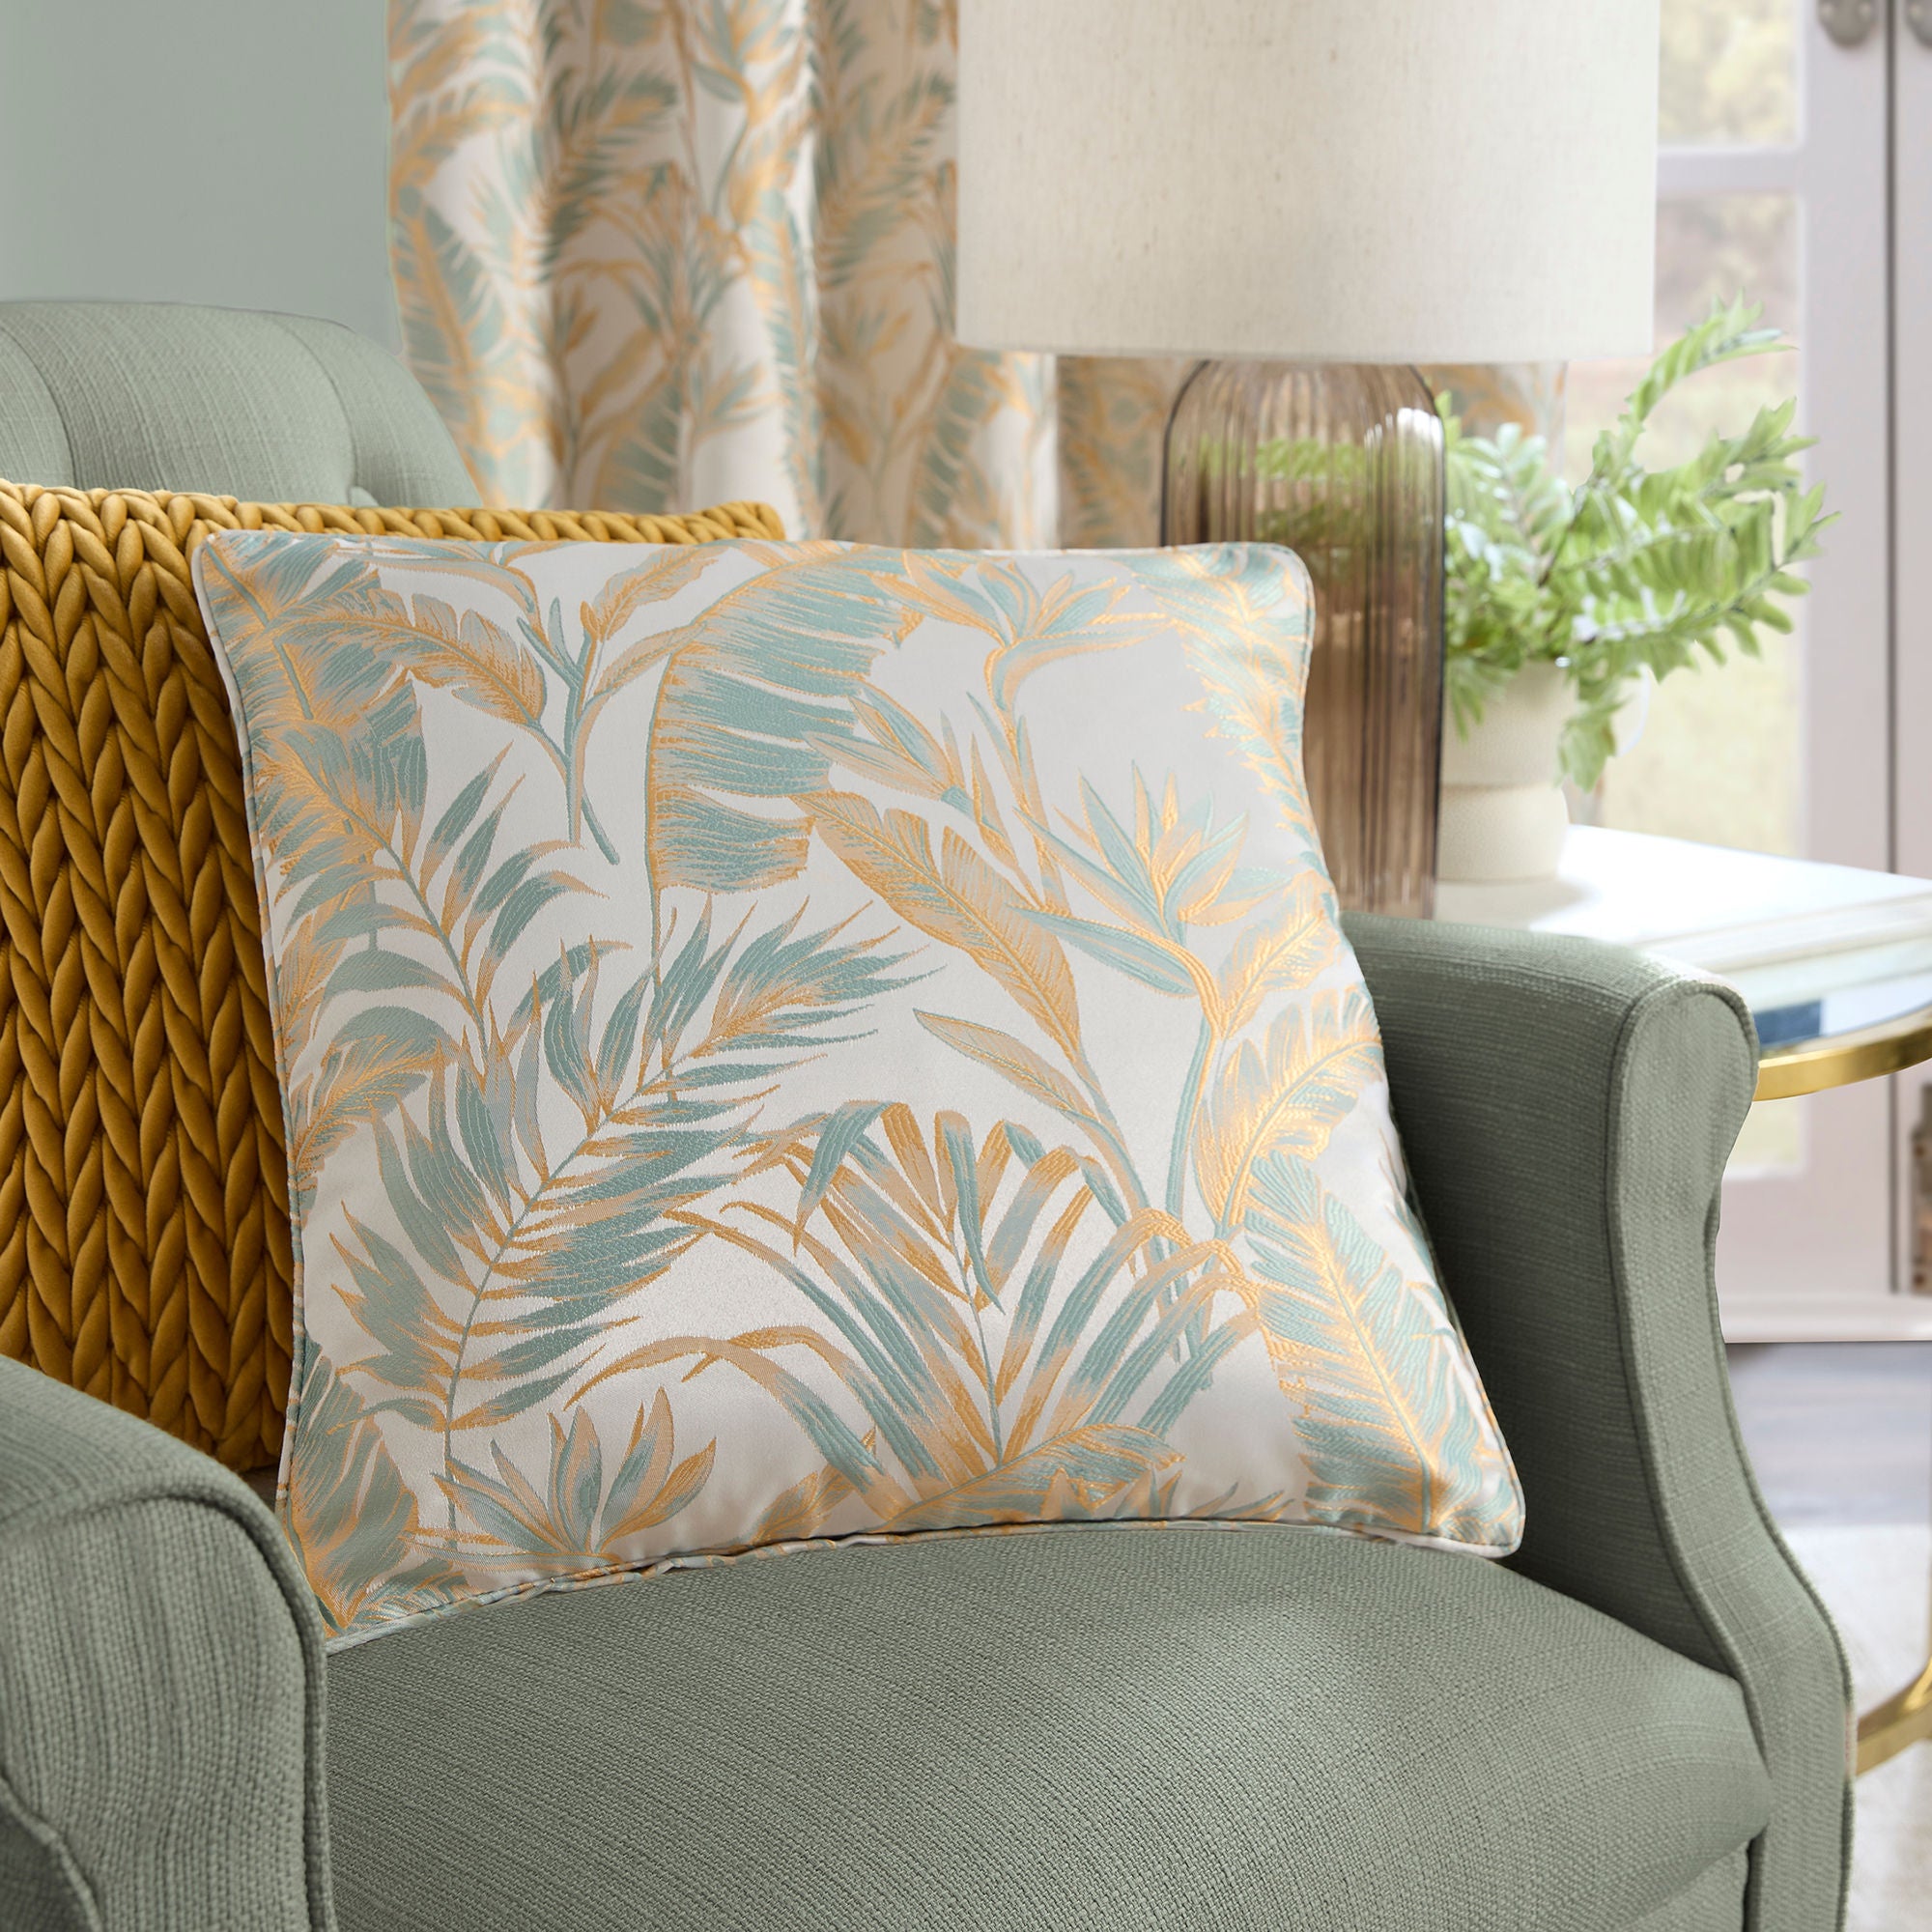 Paradise Palm Cushion by Laurence Llewelyn-Bowen in Duck Egg 43 x 43cm - Cushion - Laurence Llewelyn-Bowen